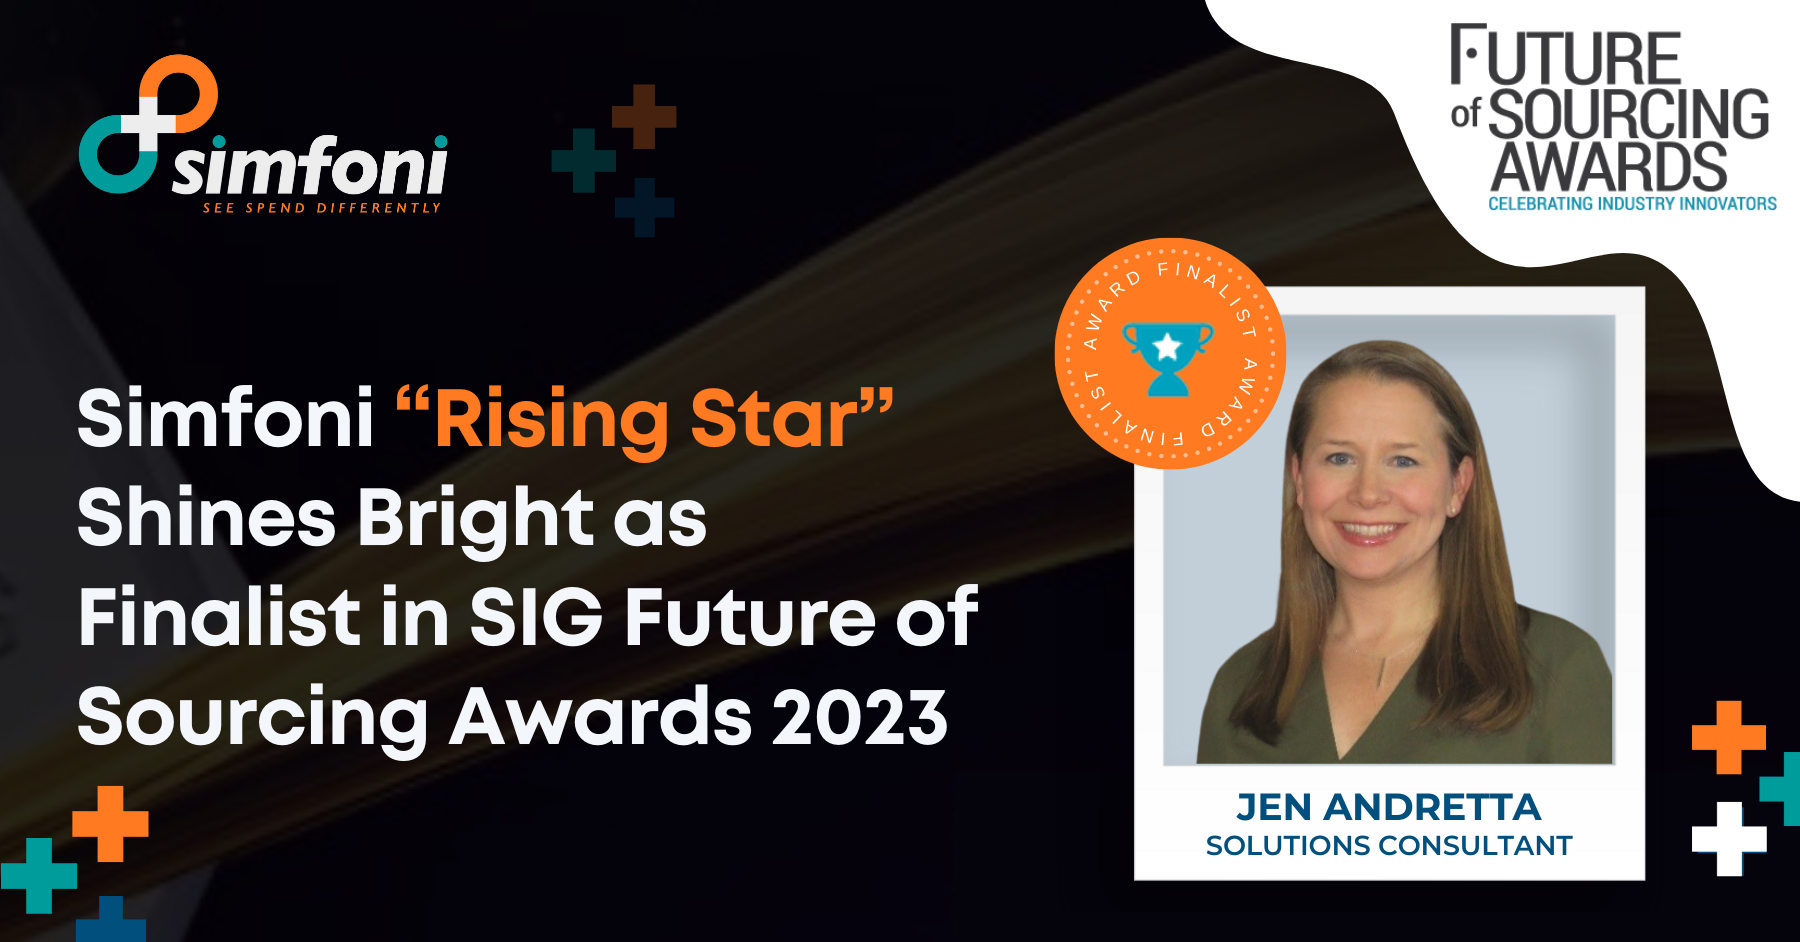 Simfoni “Rising Star” Shines Bright as Finalist in SIG Future of Sourcing Awards